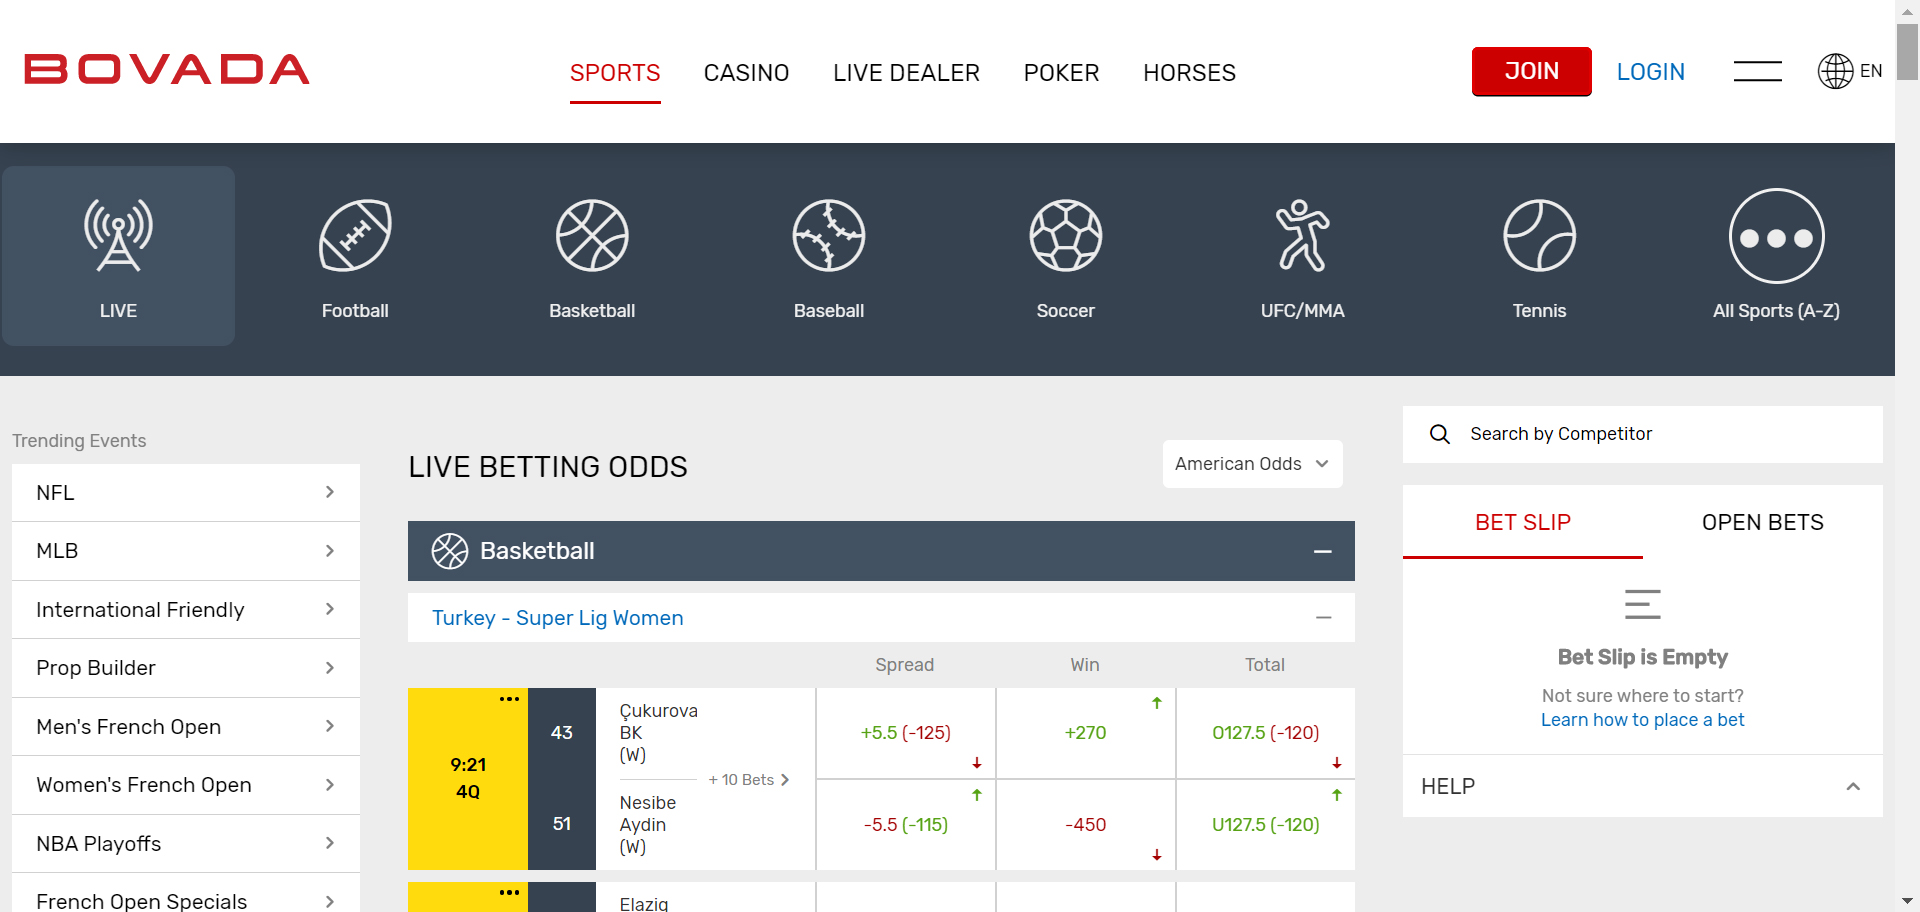 The web portal says sports-betting- useful information